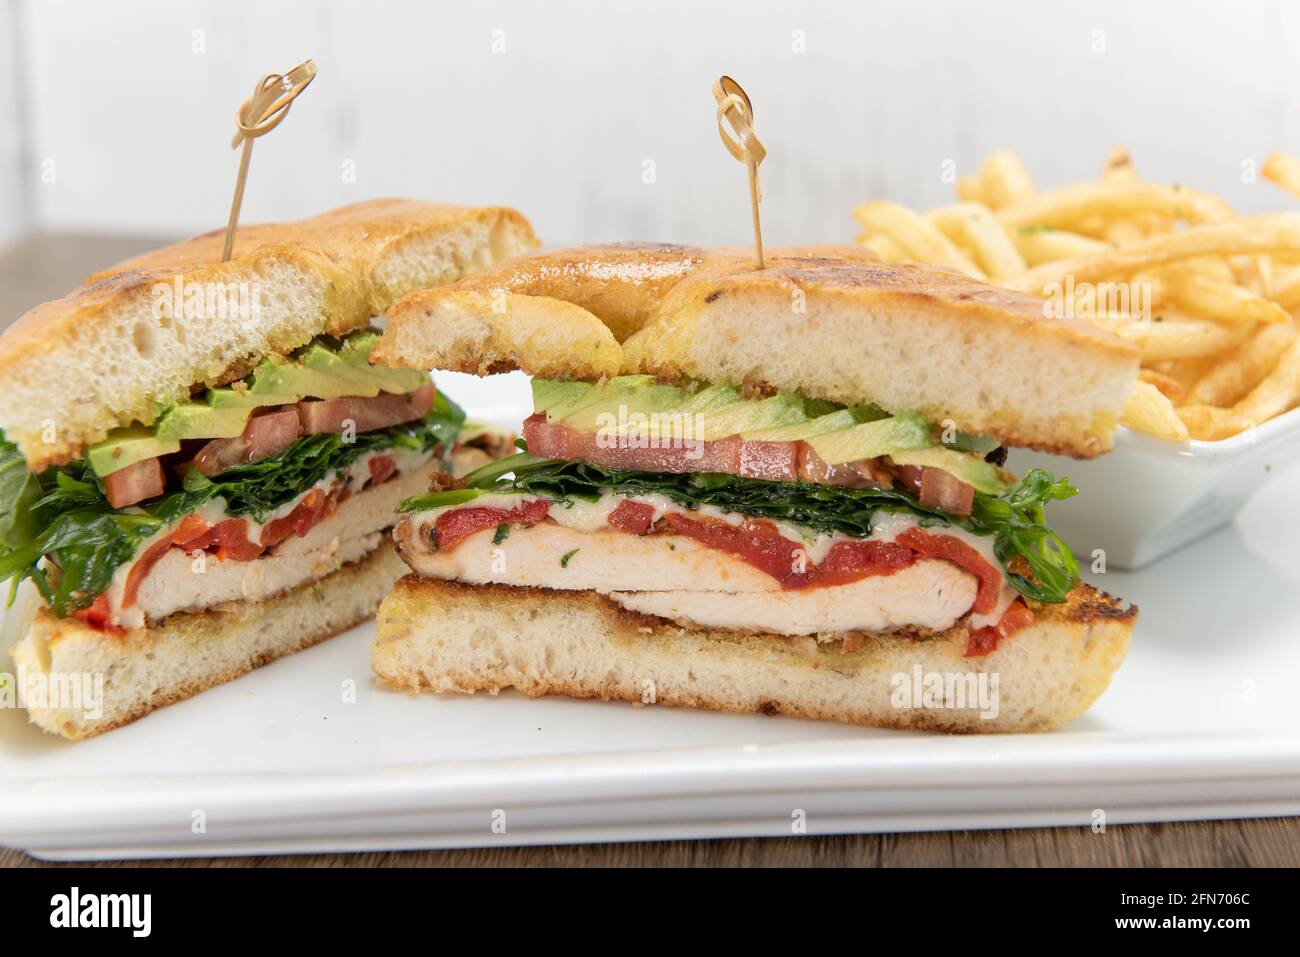 Layers loaded into this chicken sandwich stacked high with meat and fillings along with french fries. Stock Photo